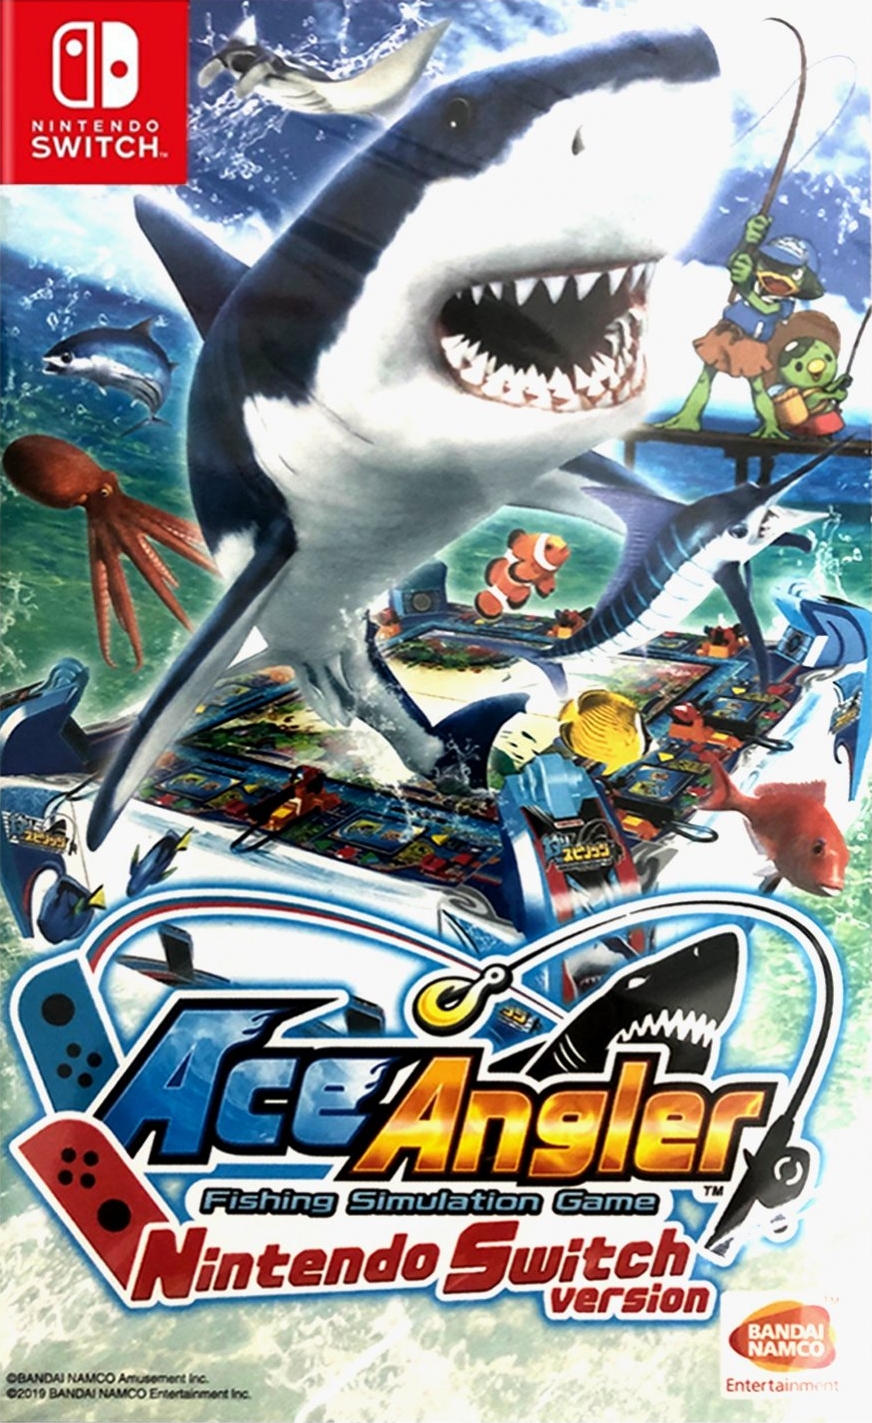 Ace Angler: Nintendo Switch Version - Announce Trailer 